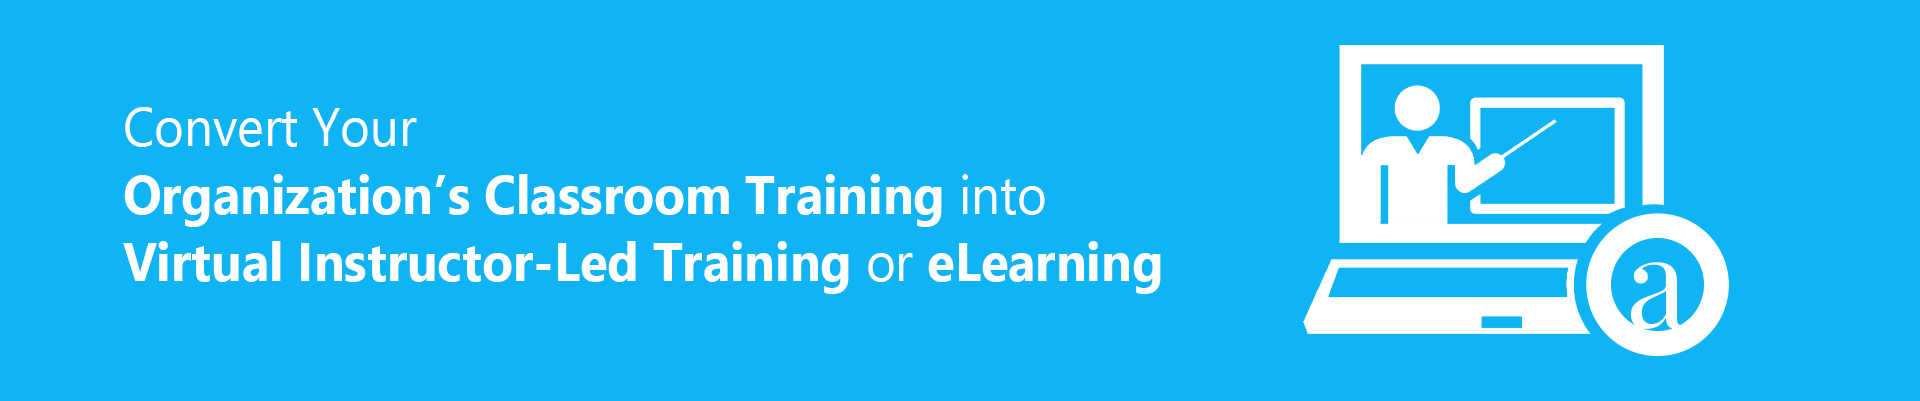 Convert Classroom Training into Virtual Instructor-Led Training or eLearning